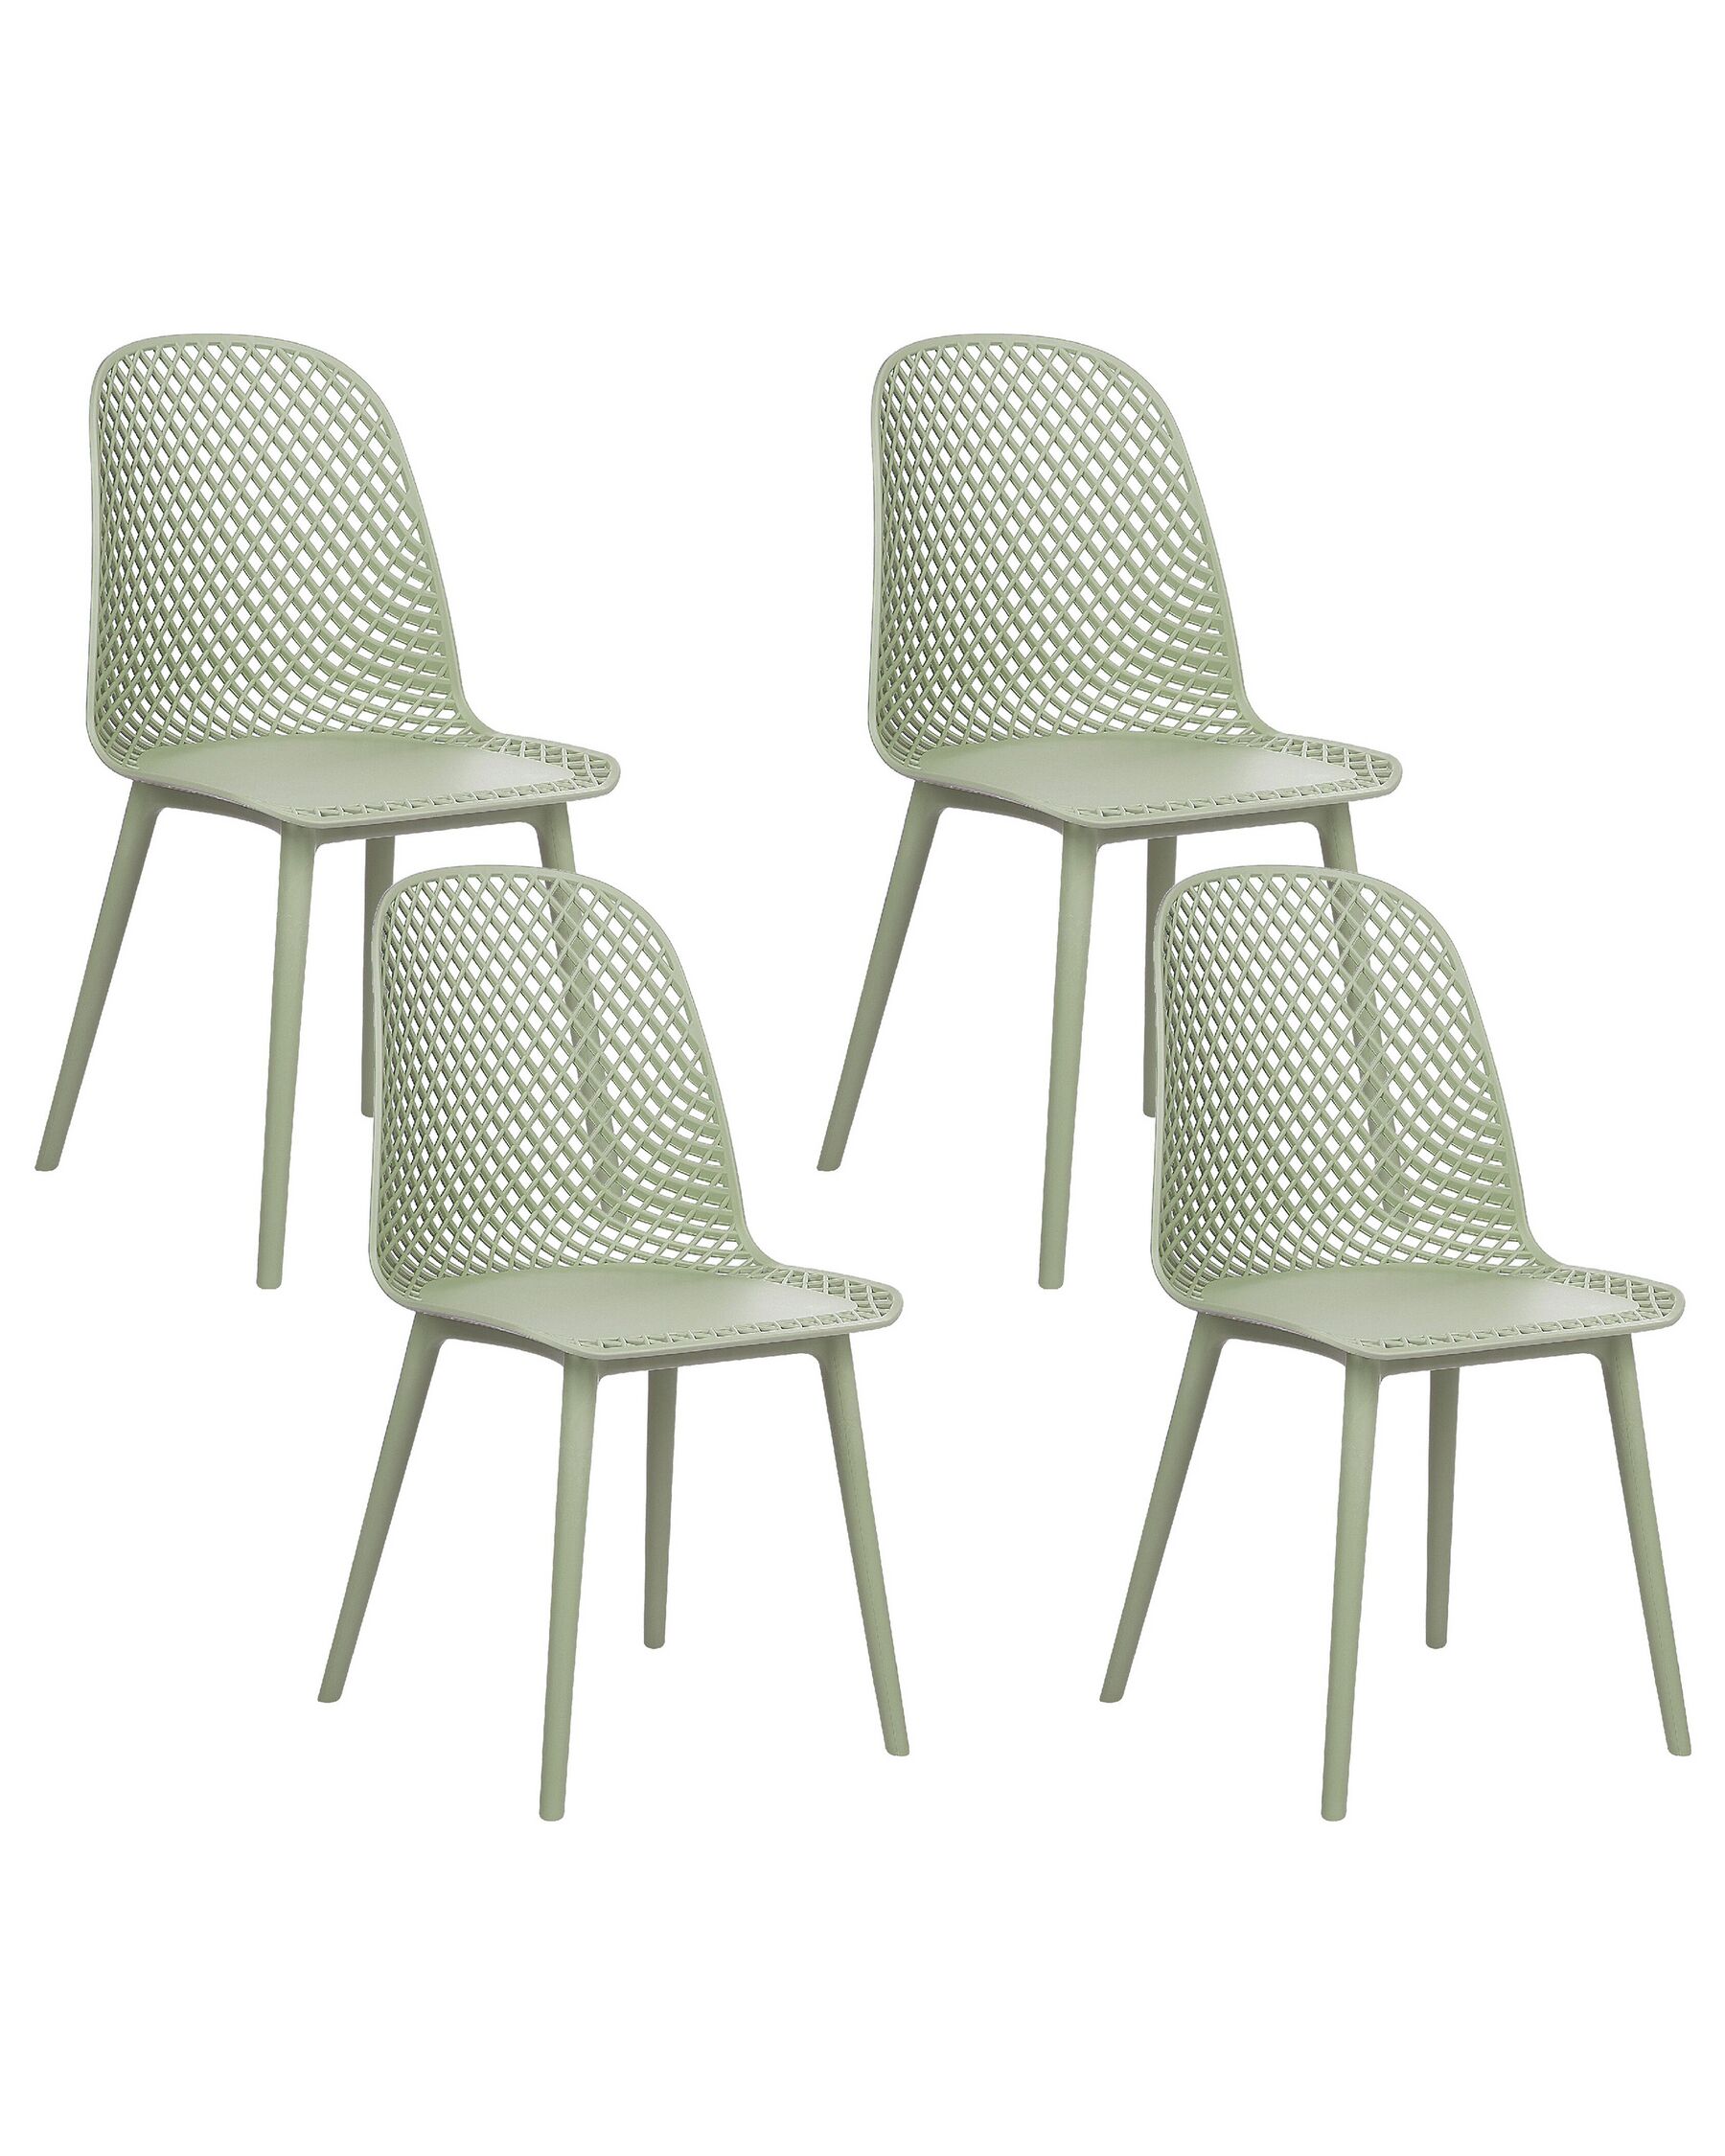 Set of 4 Dining Chairs Green EMORY_876536